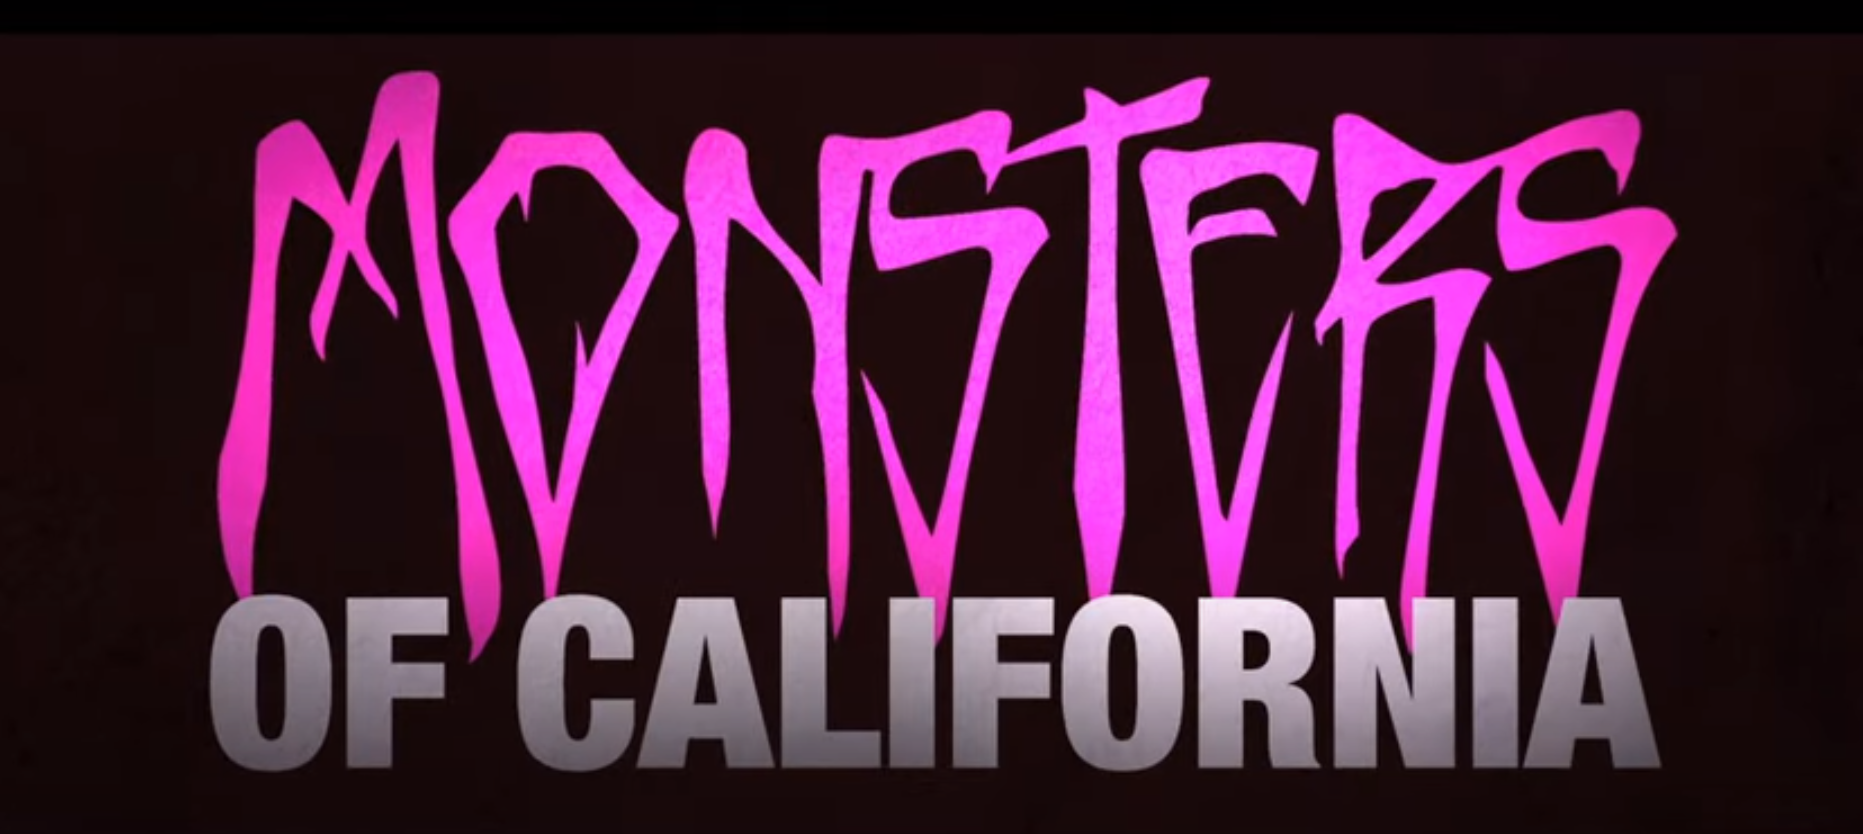 MONSTERS OF CALIFORNIA Is A Real Movie Directed By Blink-182's Tom